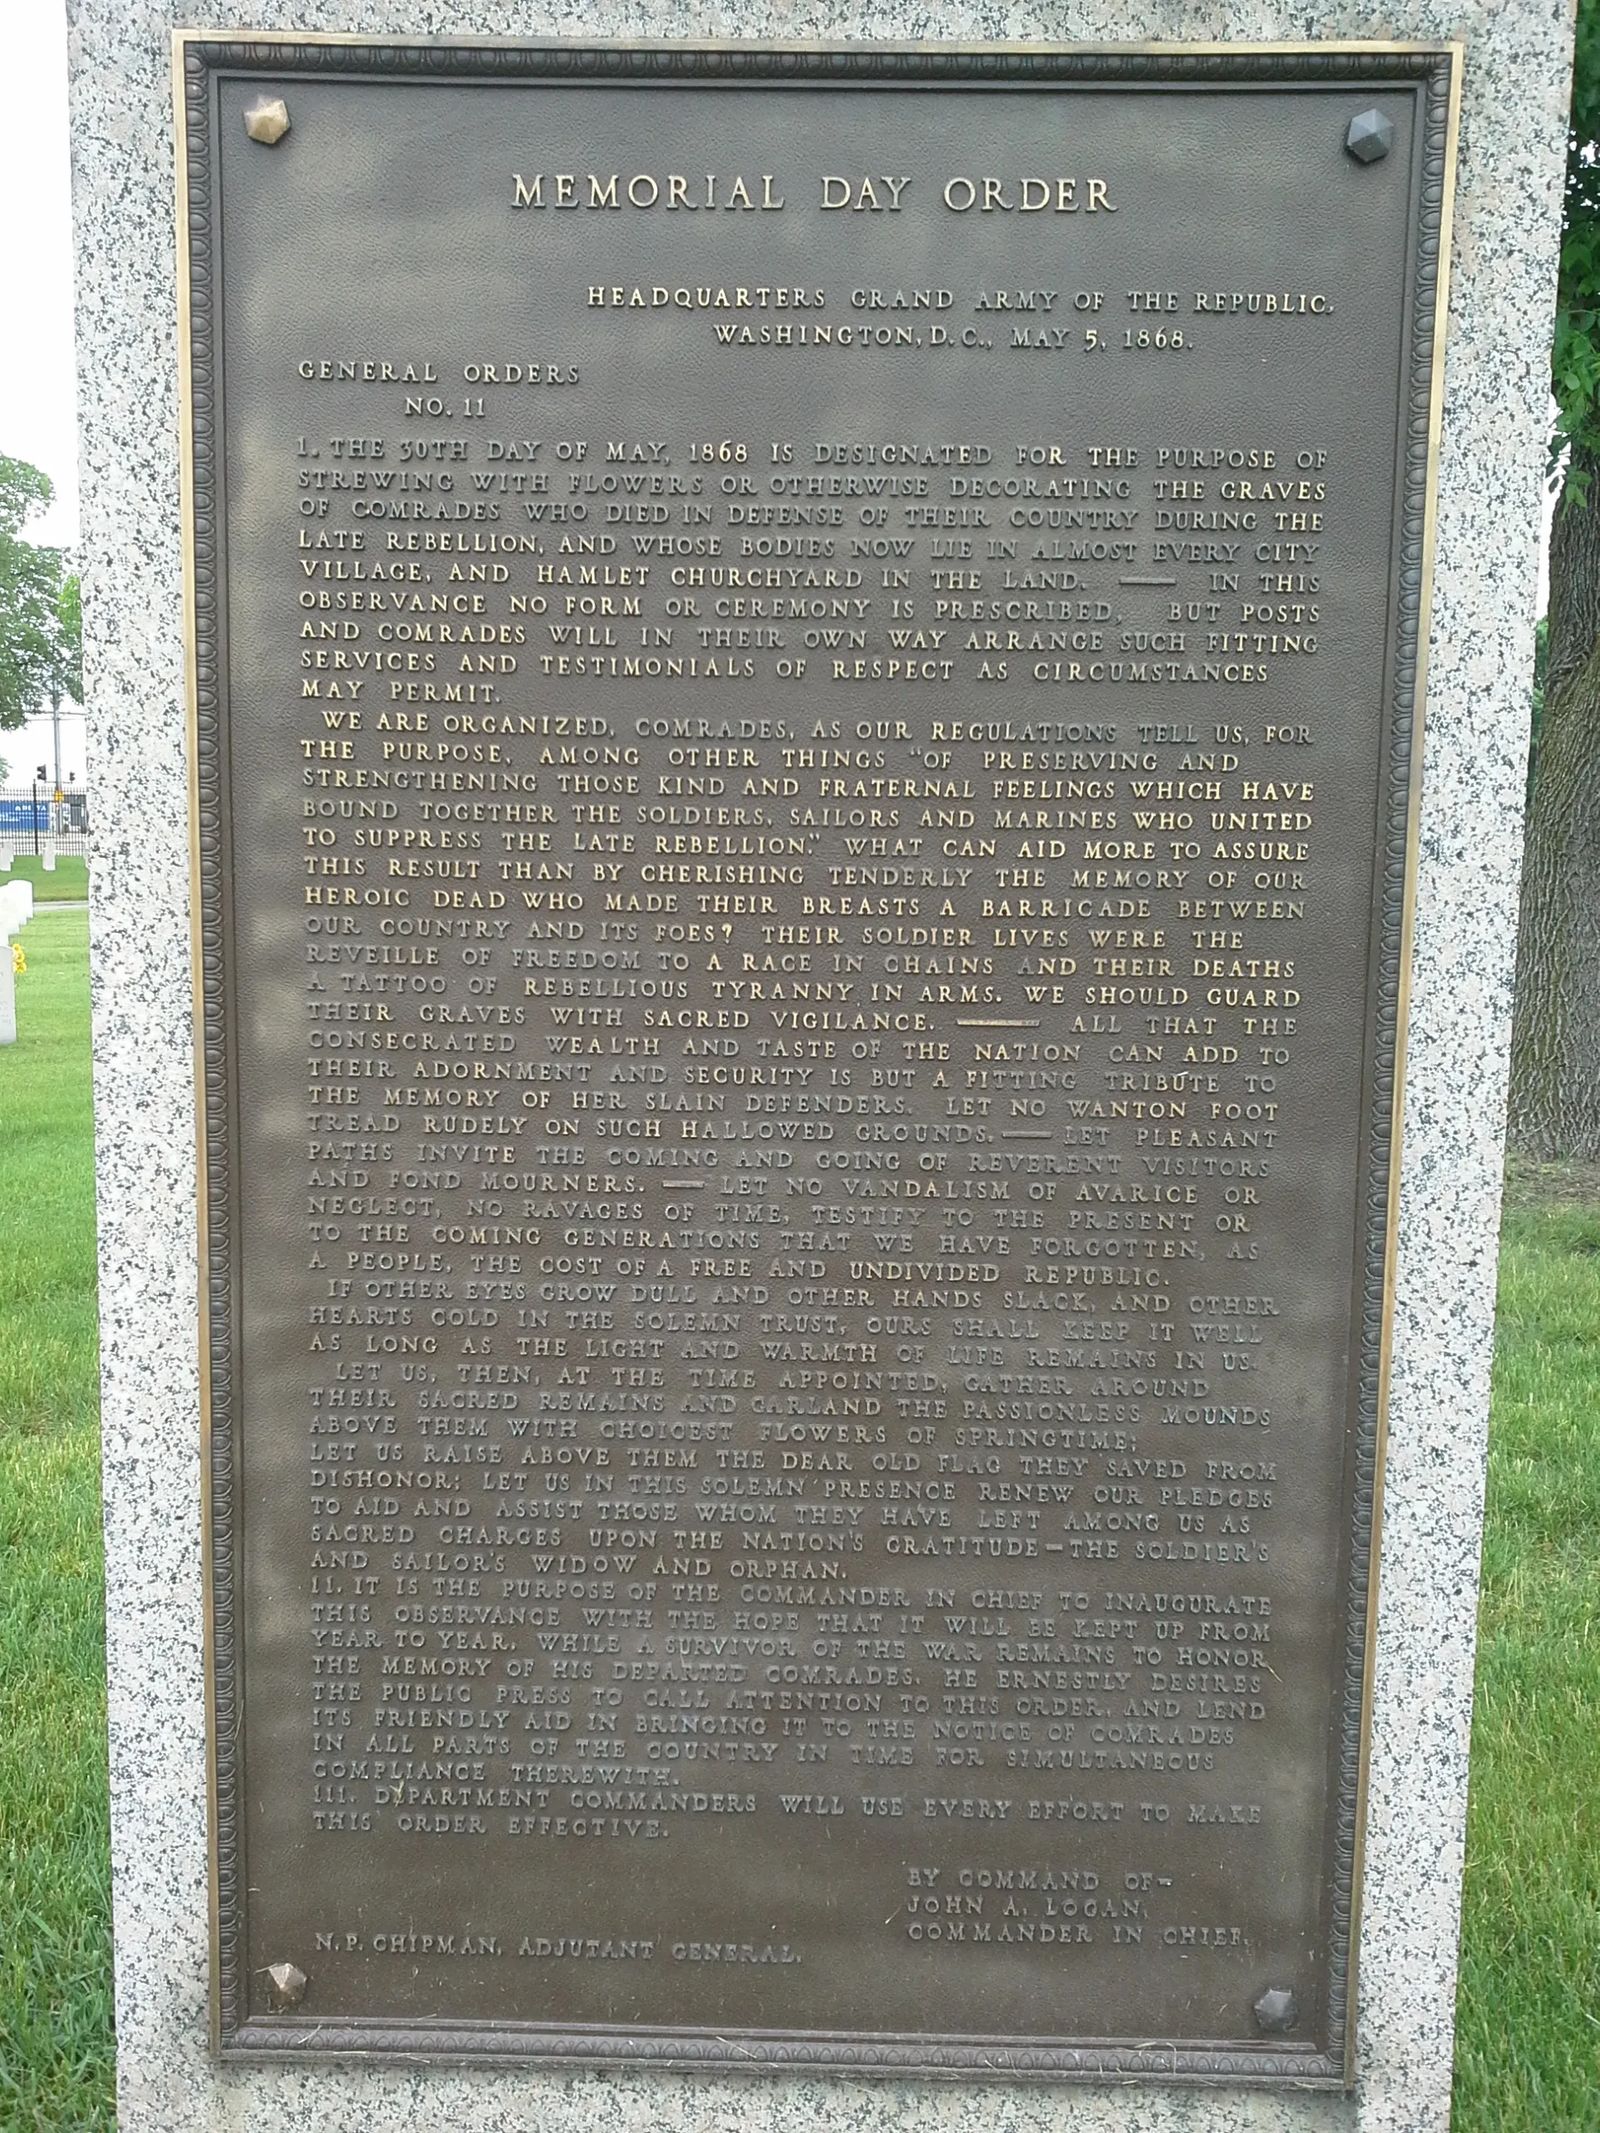 Photo of The first Memorial Day Order display in Fort Snelling National Cemetery